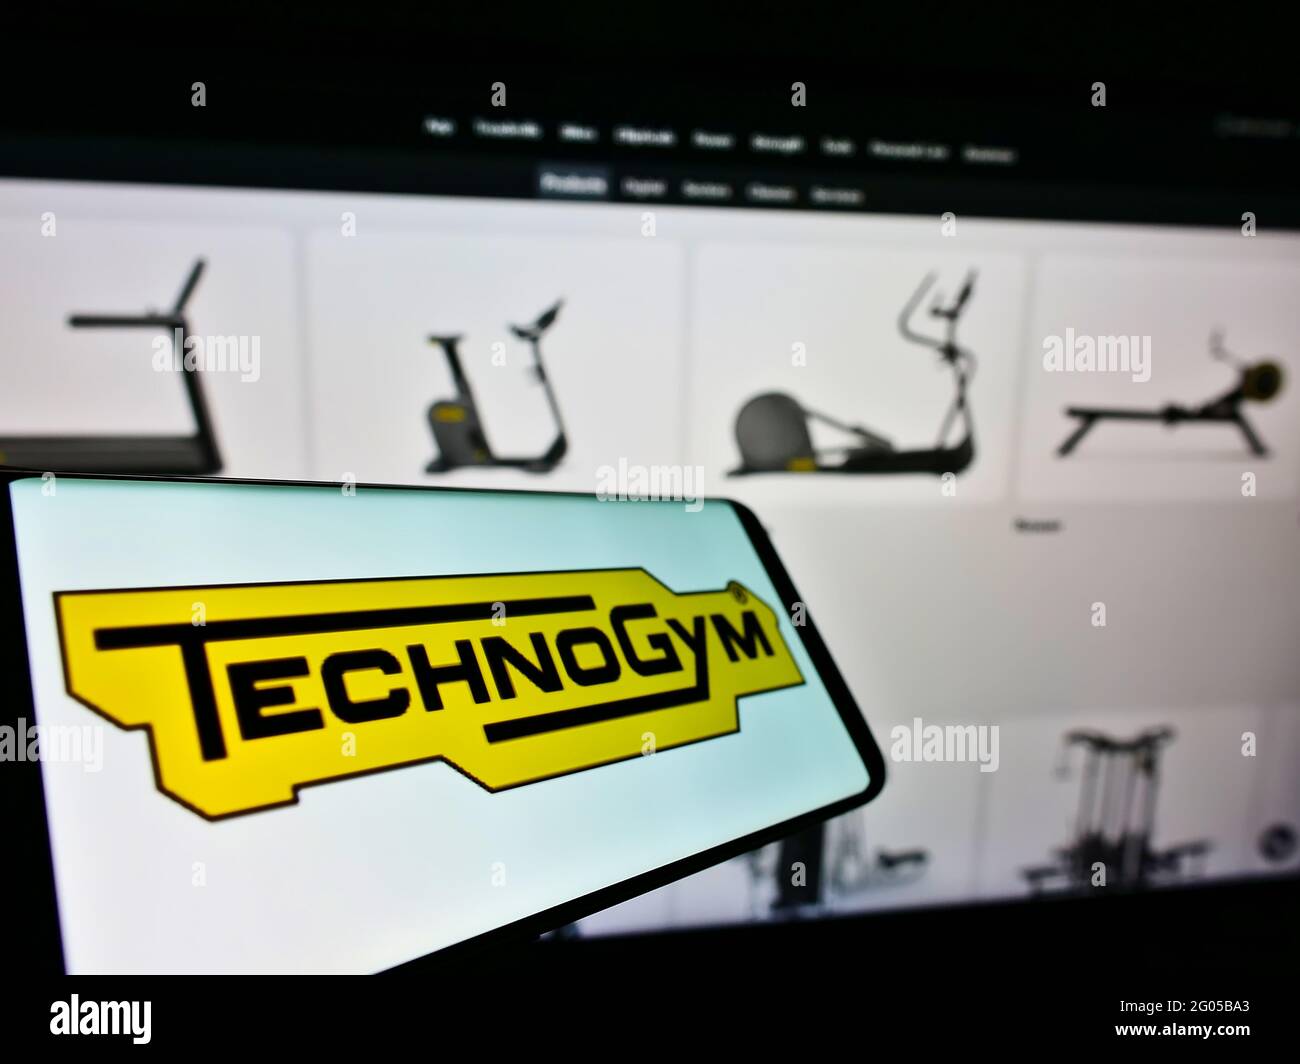 Smartphone with logo of Italian fitness equipment company Technogym S.p.A. on screen in front of business website. Focus on center of phone display. Stock Photo